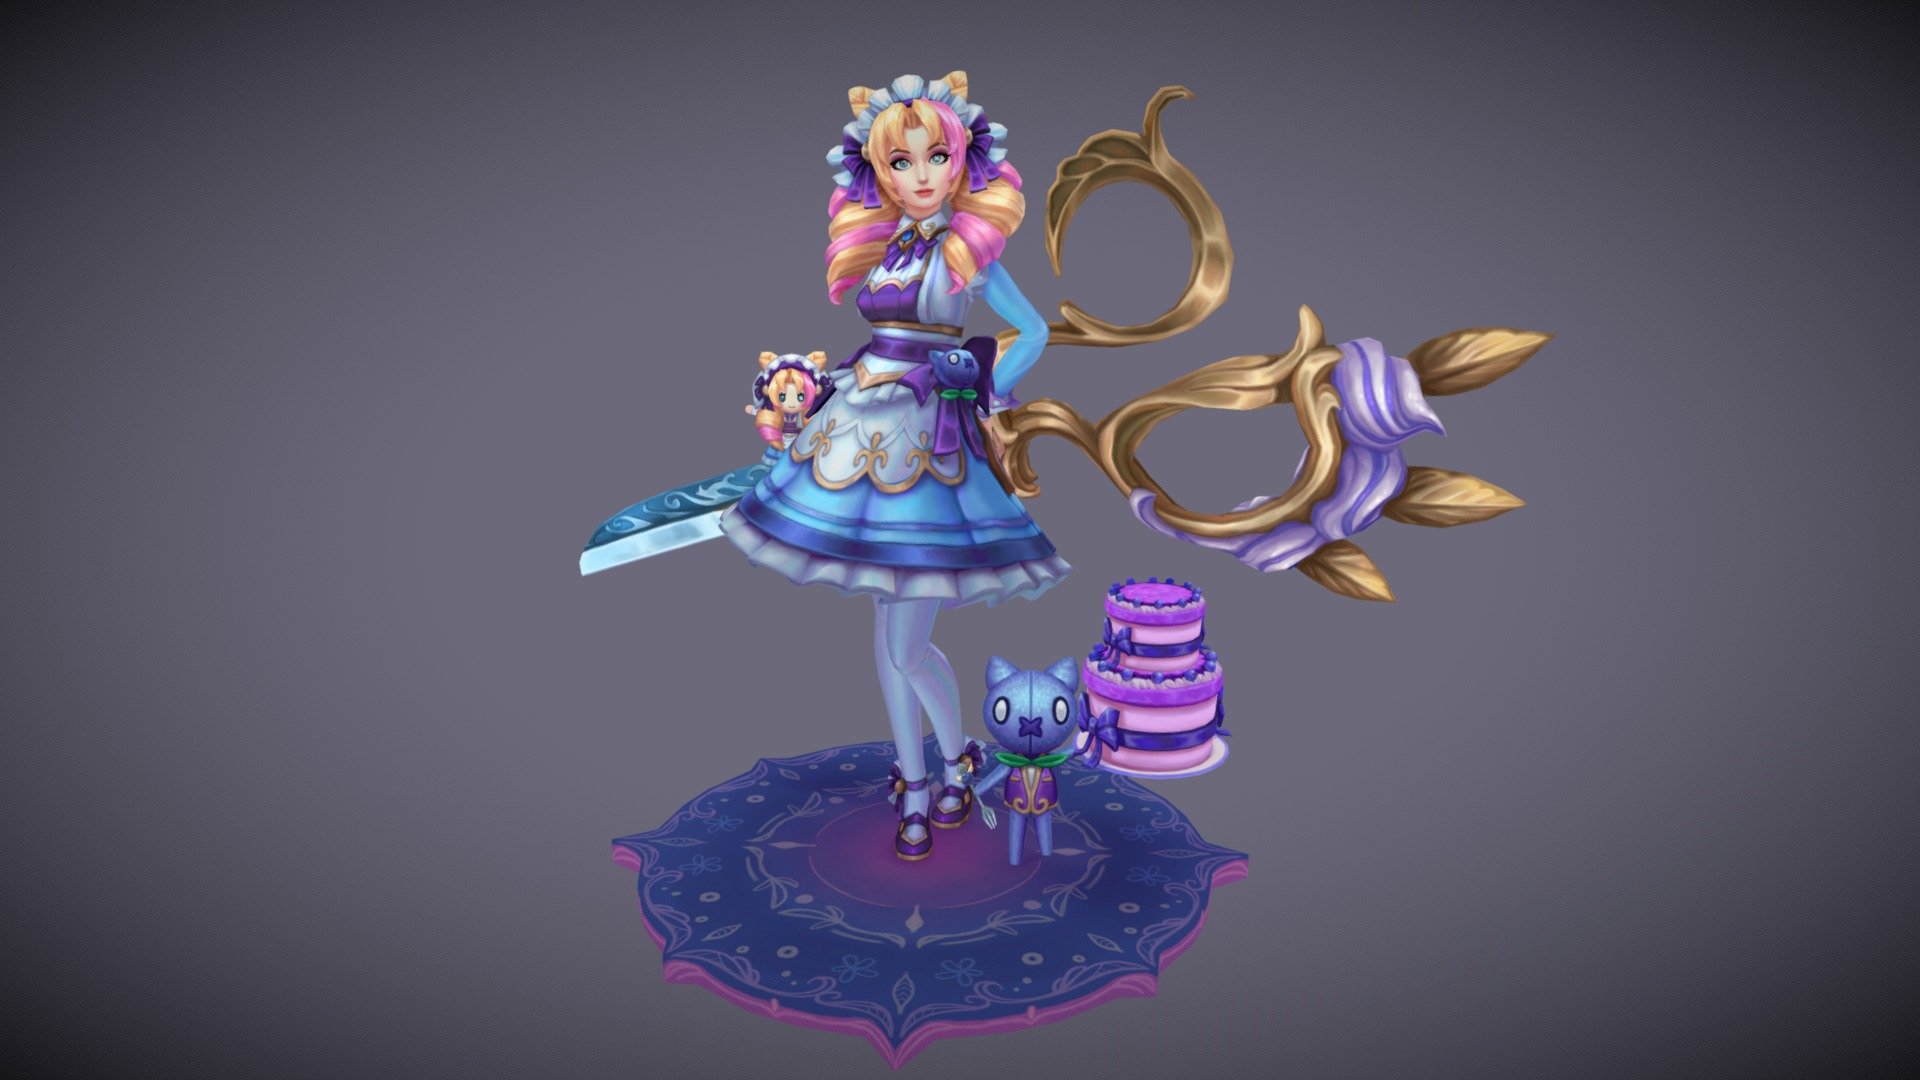 Excited for the opportunity to work on Cafe Cuties Gwen's League of Legends game model and textures, as well as her Doll and Blueberry Butler Bloob. Huge thanks to the team for the massive effort and for bringing Gwen to life! Hope you enjoy the skin! (Stand is for presentation only) 
More screenshots here!!  https://www.artstation.com/artwork/3qBRx2

Concept artists: 
Taylor Jansen,
Fortune K,
Thomas Randby

Tech Art: JP 

3D: Kylie Gage

VFX:  Celine Pak

SFX: Tristan M,
 Sandy Z

Anim: Jun Sui

QA: Victoria VG,
 Katey Anthony

Prod: Jenny Huls 

AD: Brian V - Cafe Cuties Gwen - 3D model by kyliejaynegage (@kyliejaynesmith) 3d model